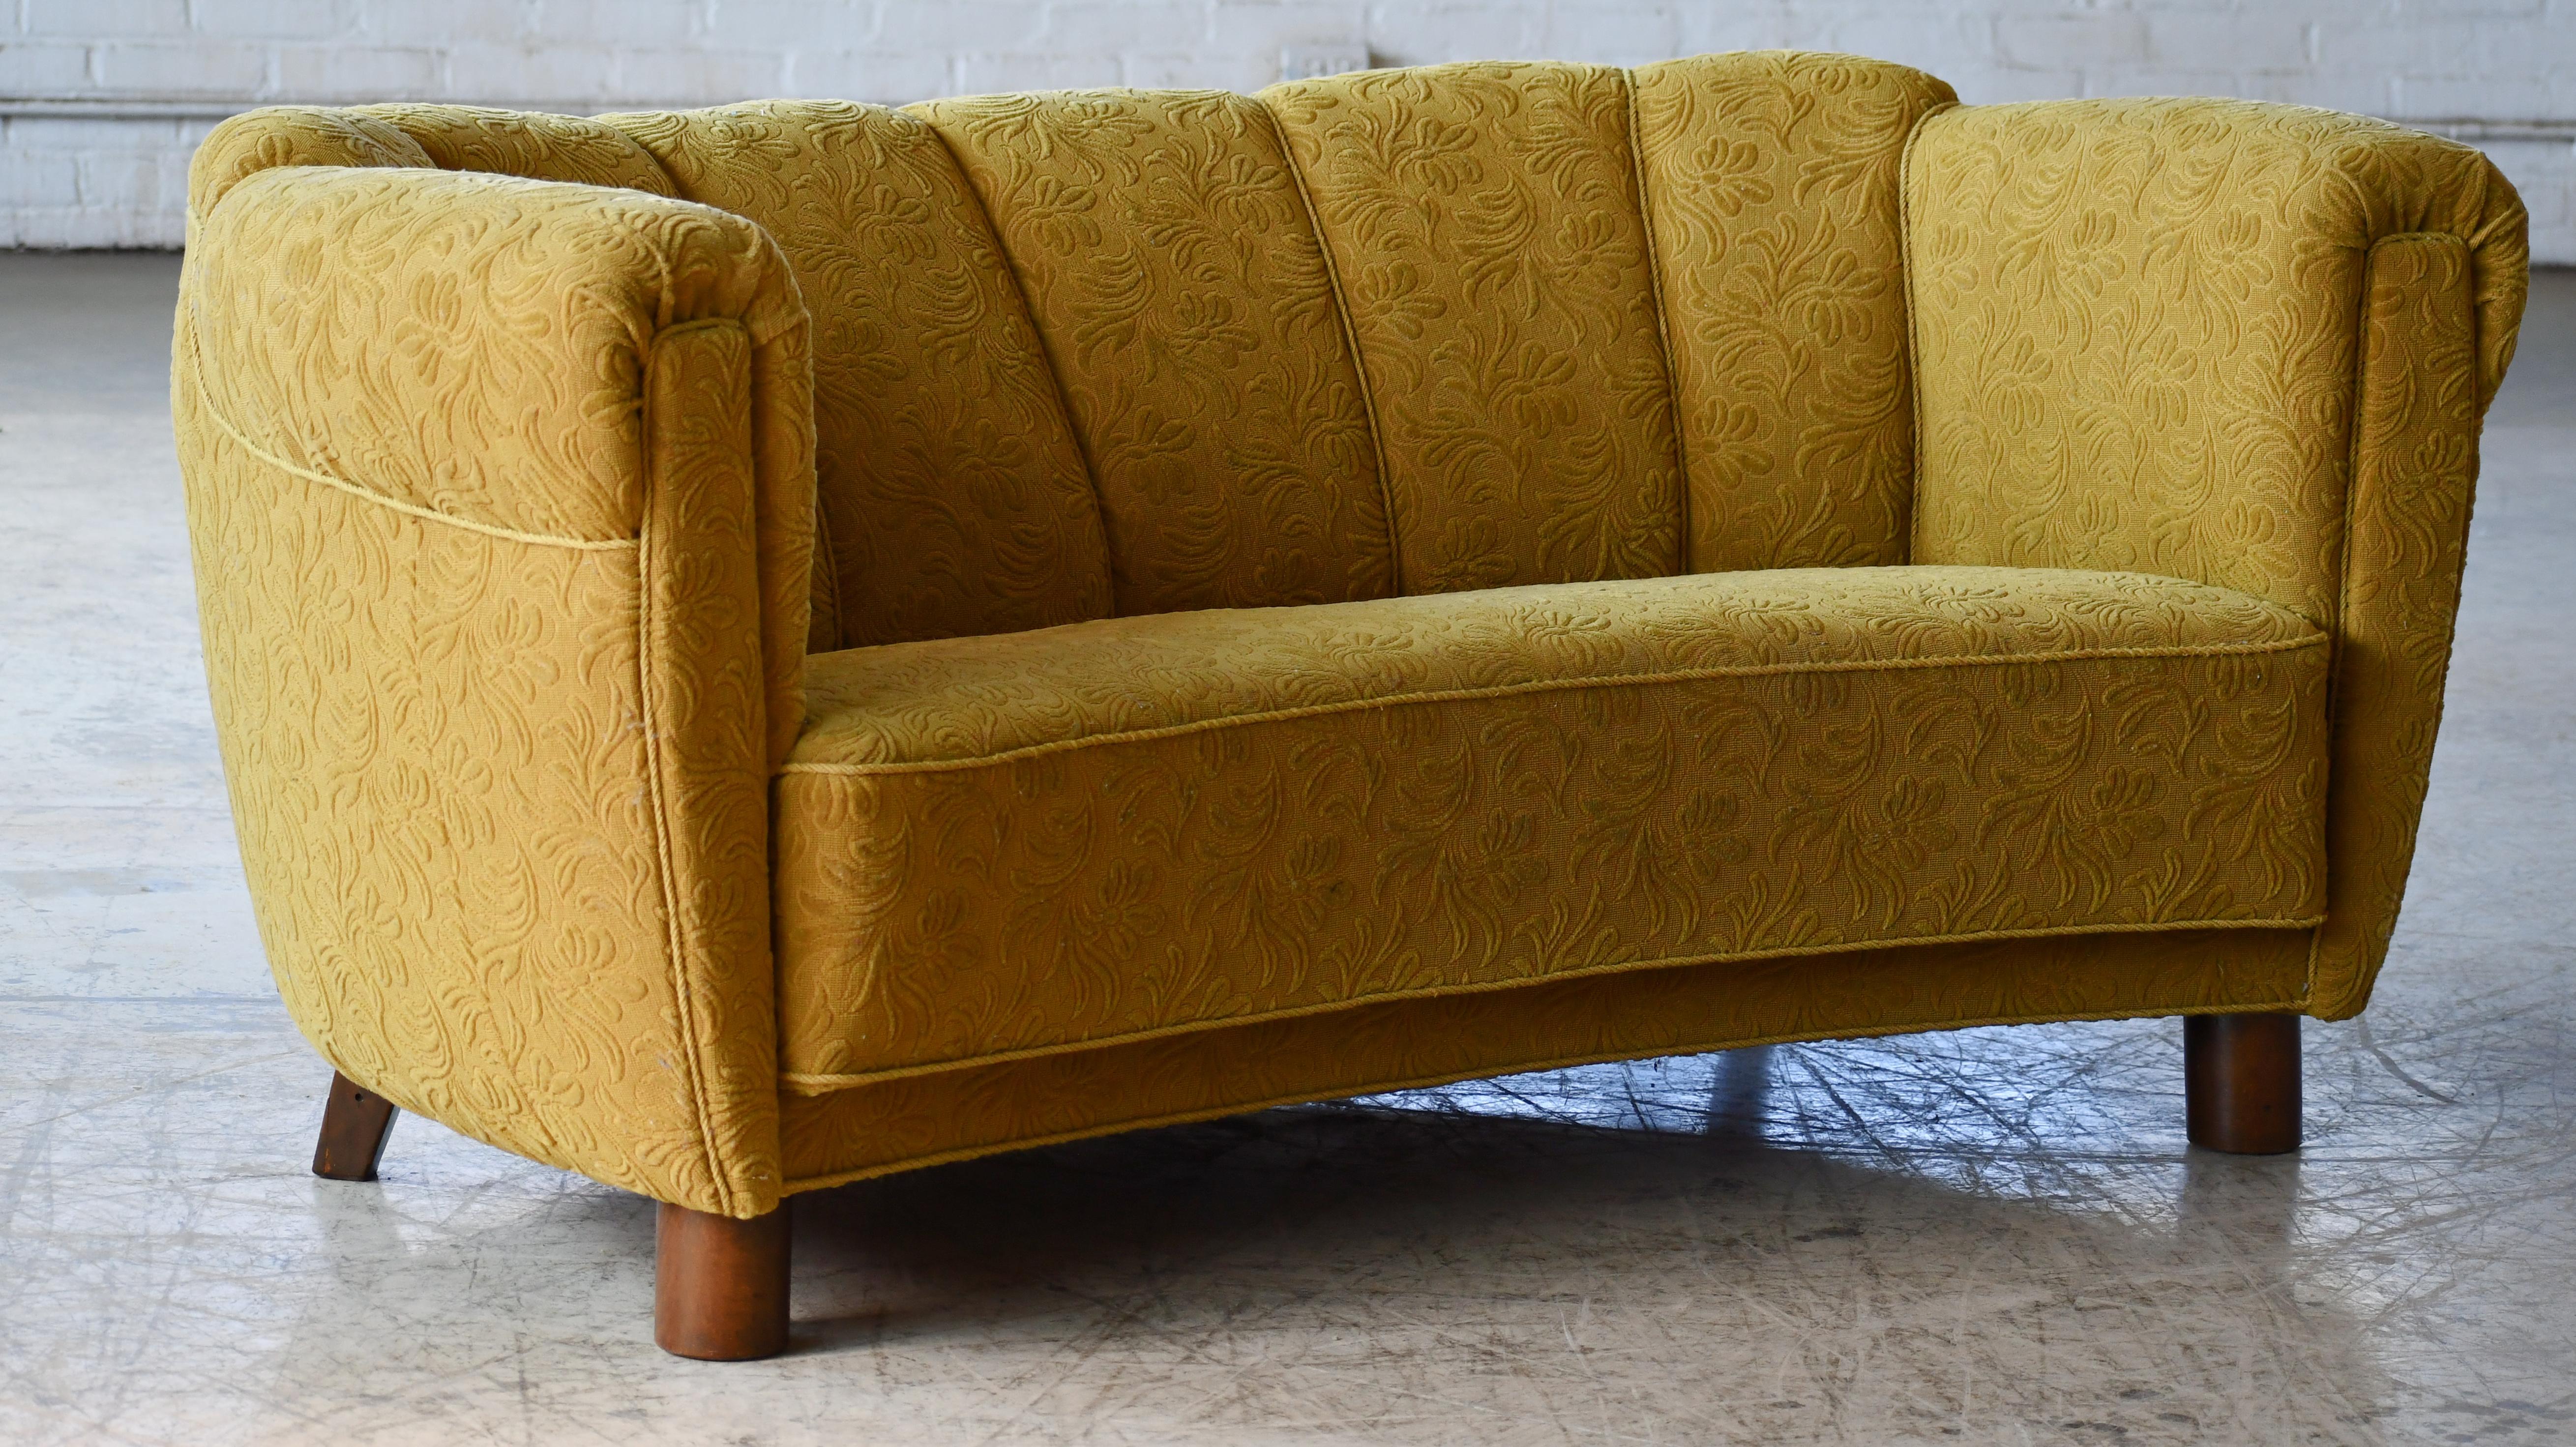 Beautiful Danish curved sofa or Banana sofa as the Danes call them. This sofa is a bit unusual compared to others from the era as it has a raised backrest a detail sometimes seen in the Art Deco era. Resting on cylindrical legs in the front. Most